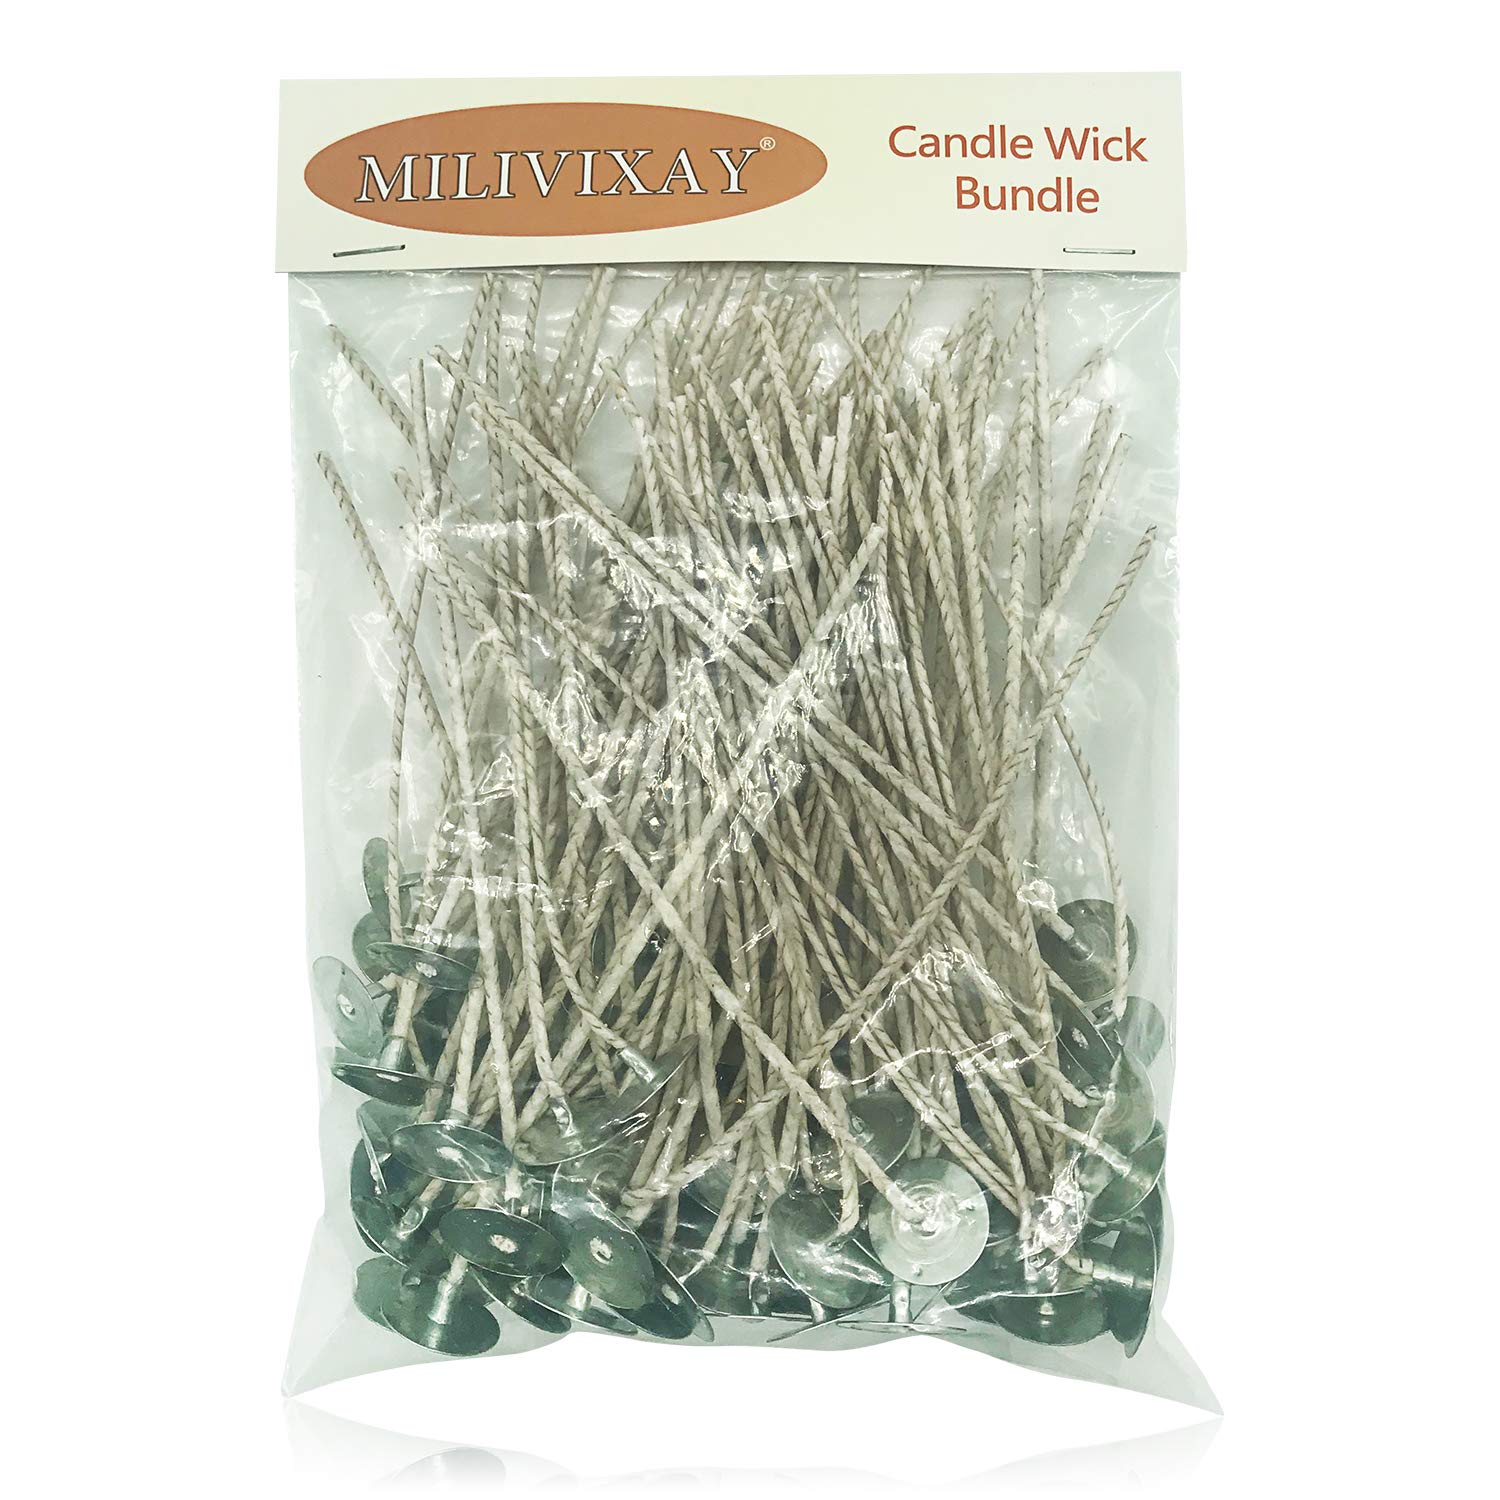 100pcs ECO14 Wicks for Soy Candles, 8 inch Pre-Tabbed Candle Wick for Candle  Making,Thick